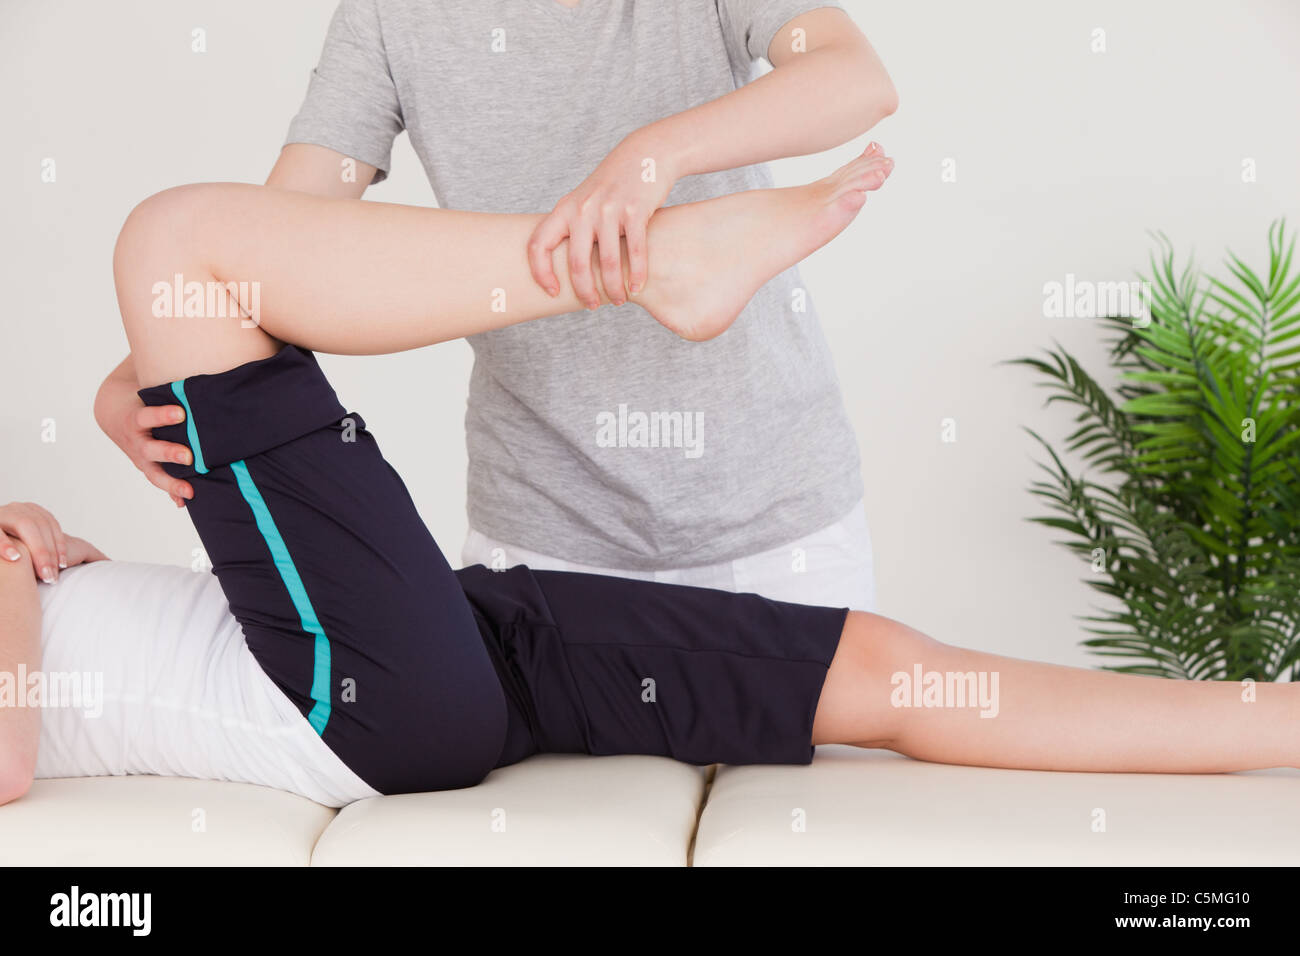 Masseuse stretching the right leg of a young woman Stock Photo